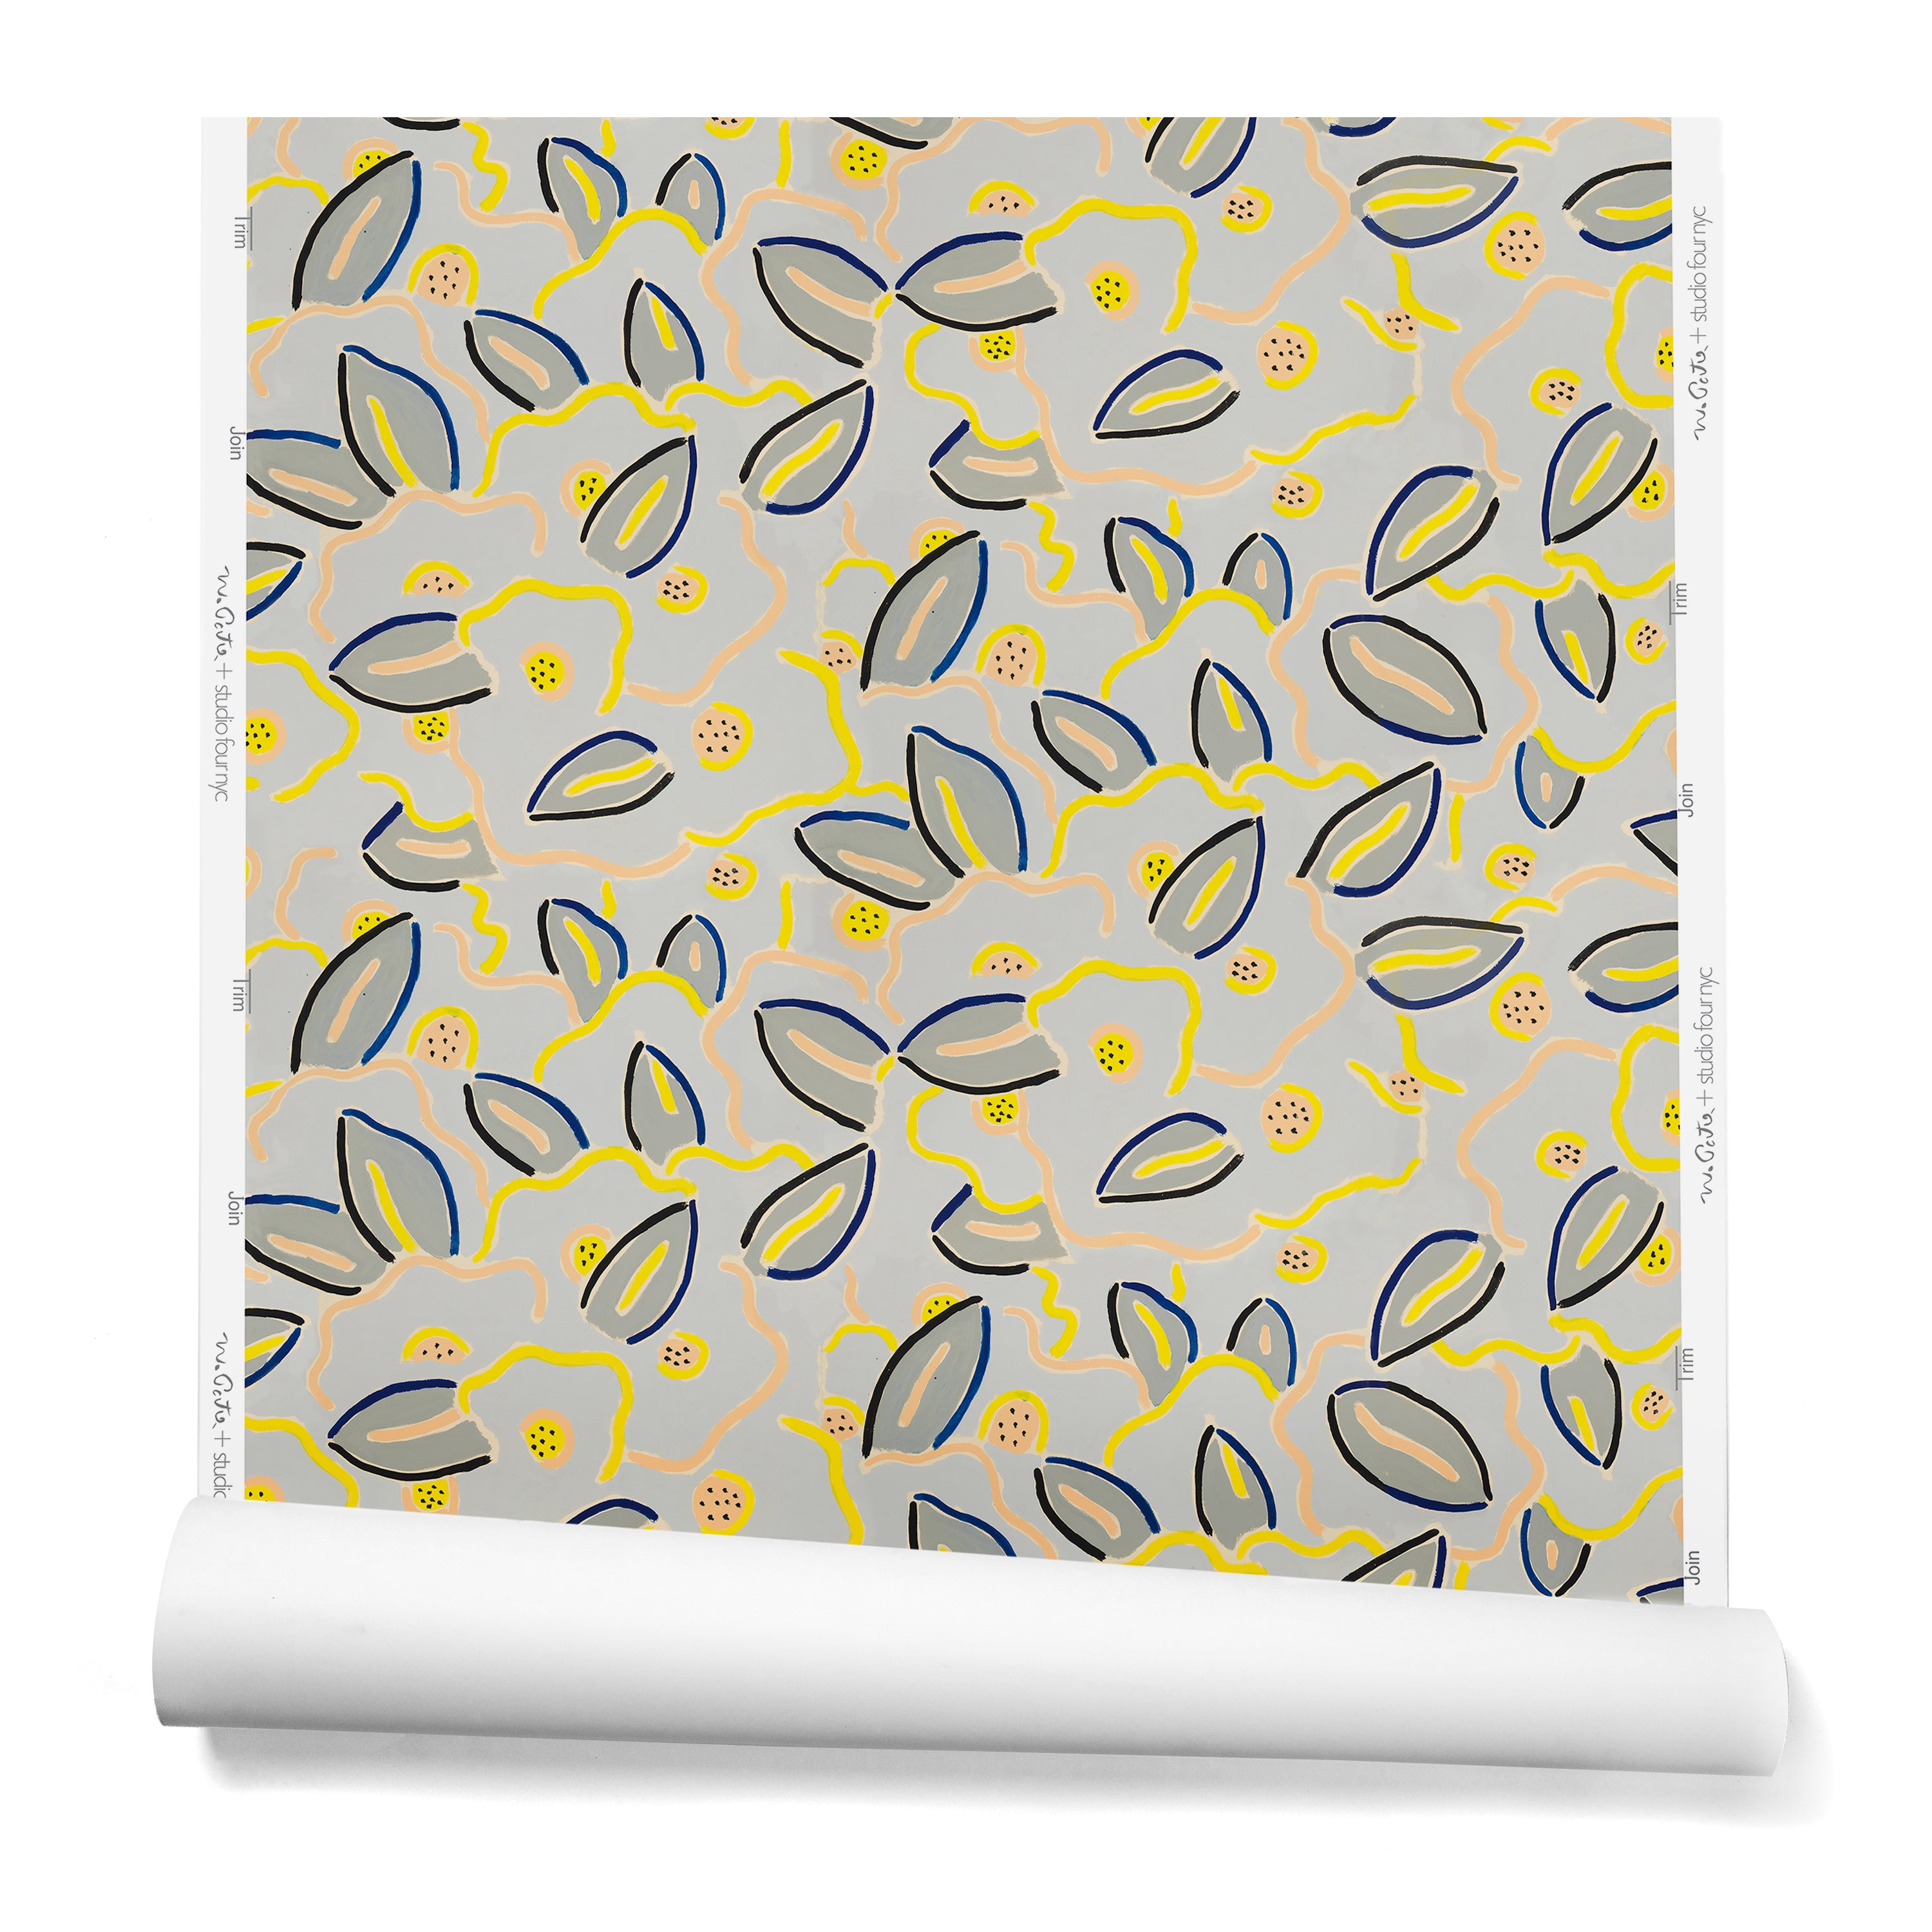 A hanging roll of wallpaper in a large-scale minimal floral print in shades of navy, yellow and pink on a gray-blue background.